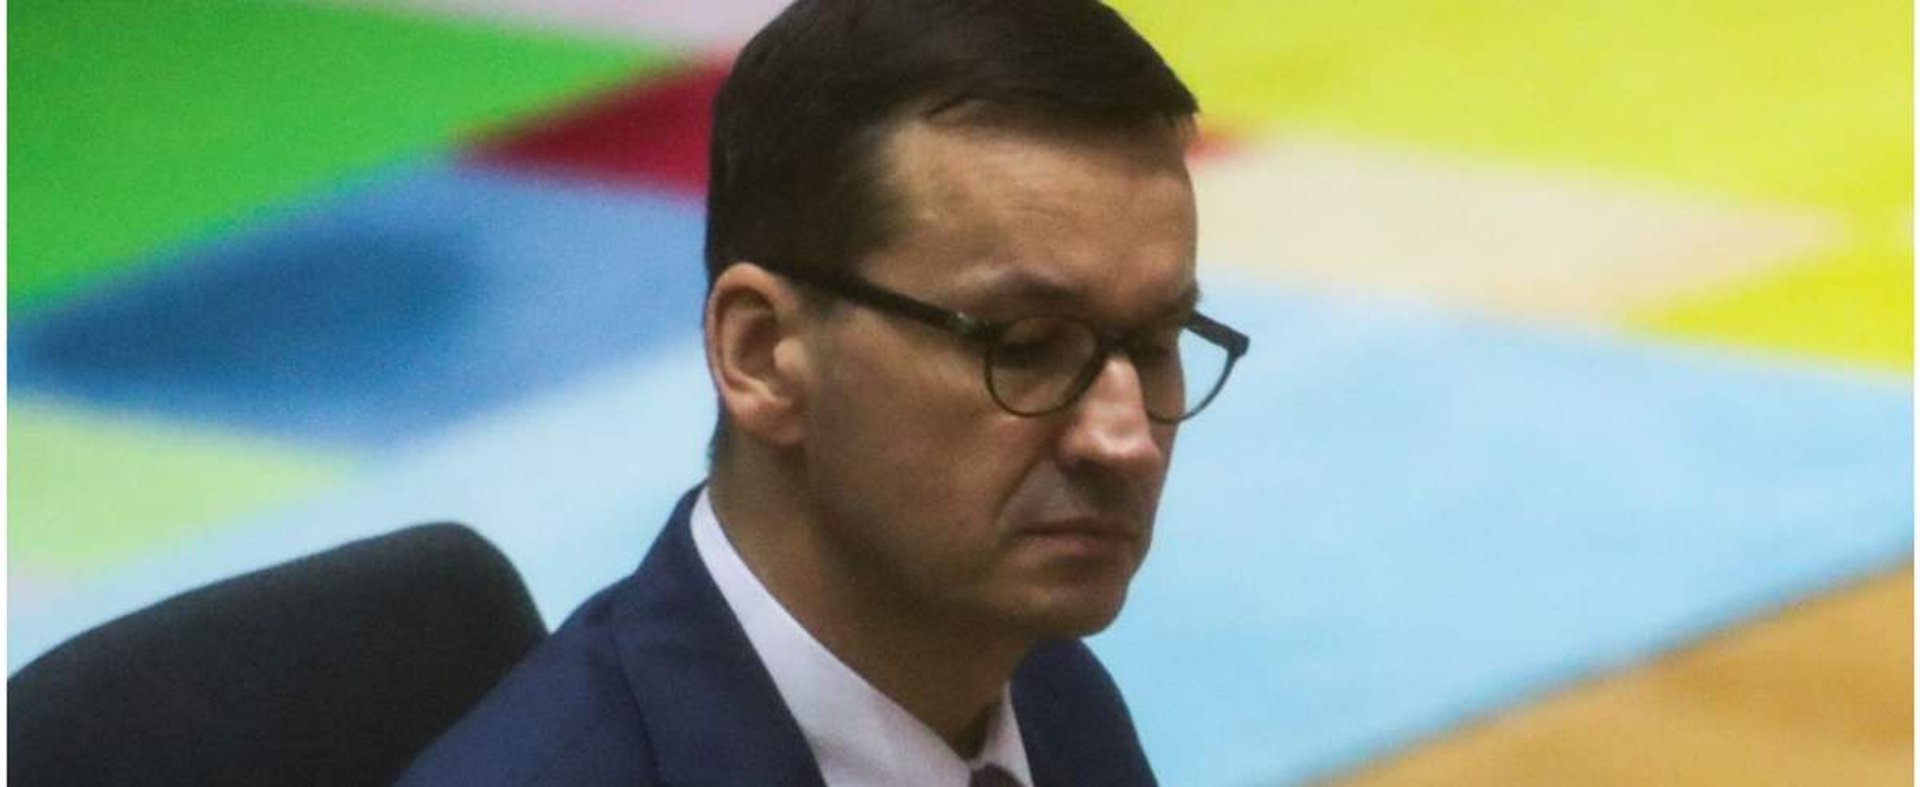 Poland's Prime Minister Mateusz Morawiecki attends a round table meeting during an EU summit at the European Council building in Brussels, on December 11, 2020. - EU leaders agreed after a long night of wrangling to set a more ambitious target of cutting 